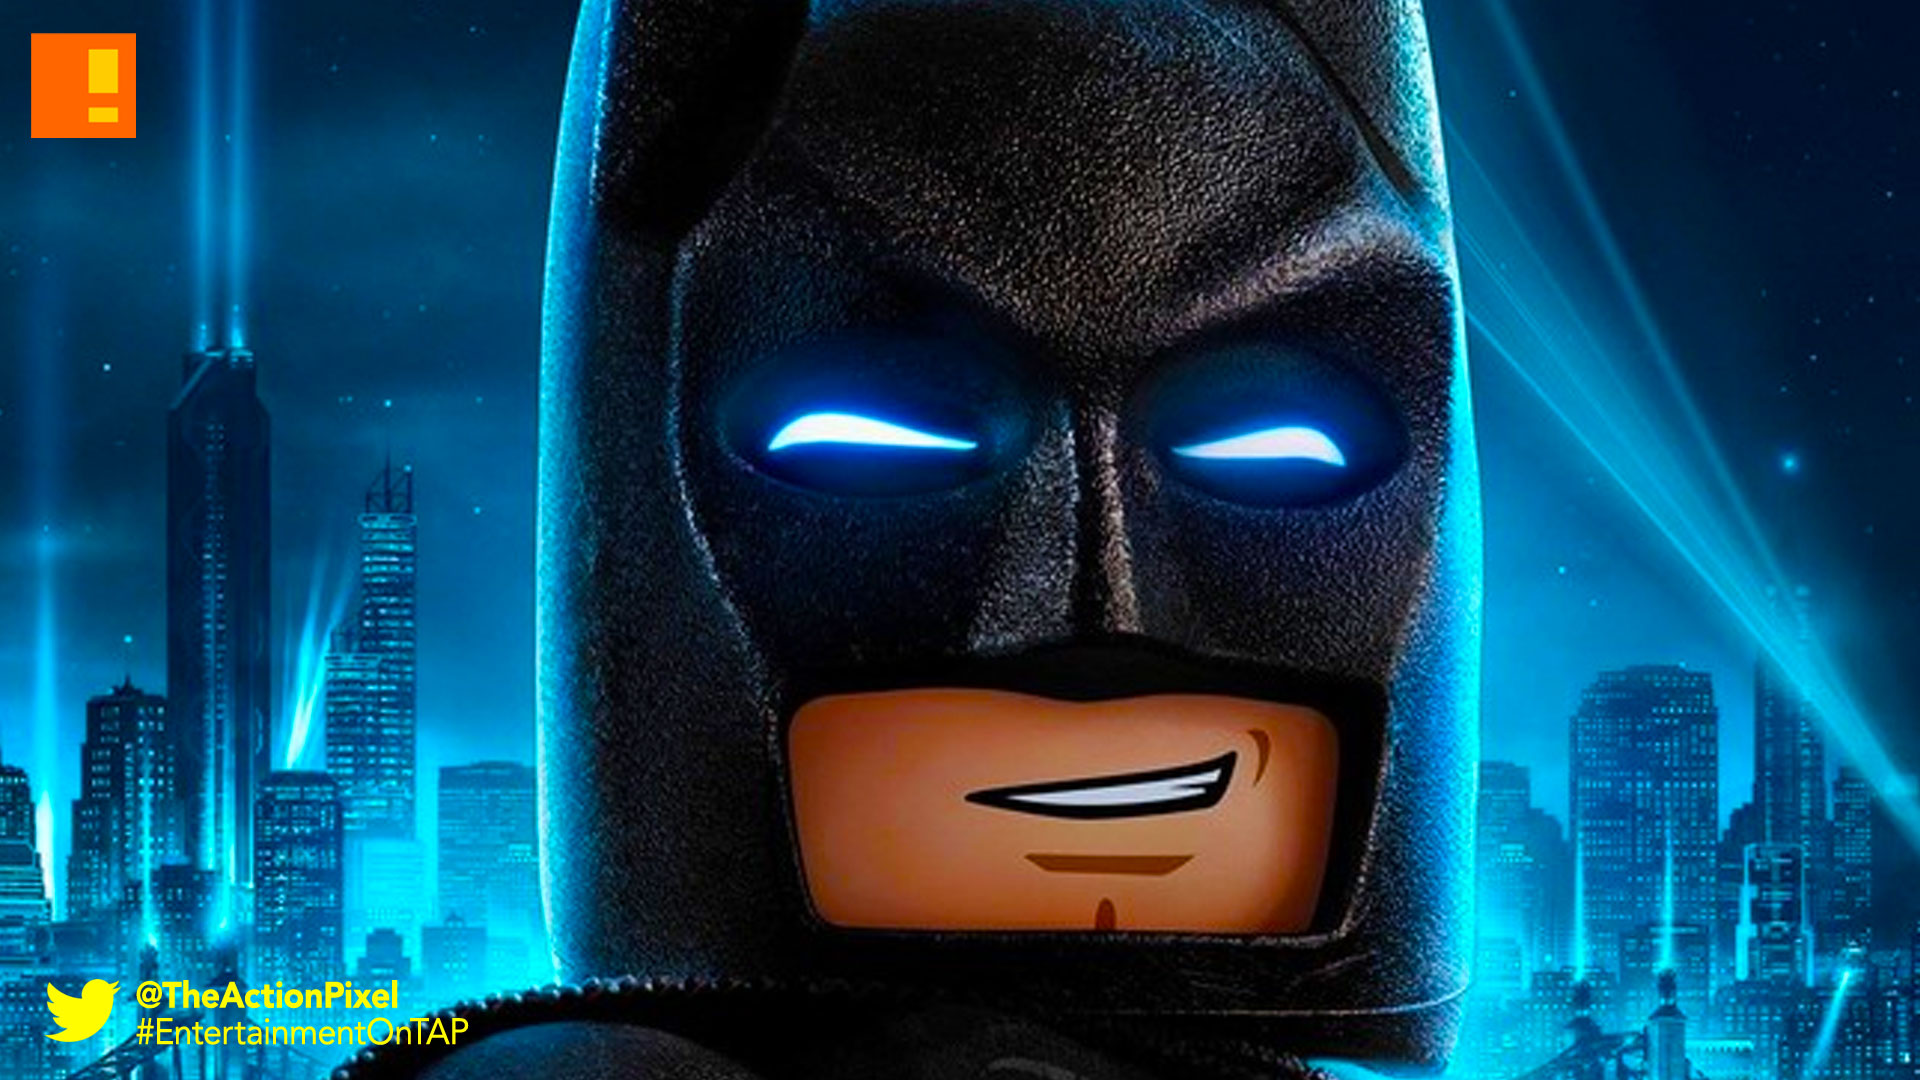 The Lego Batman Movie” character posters released – The Action Pixel